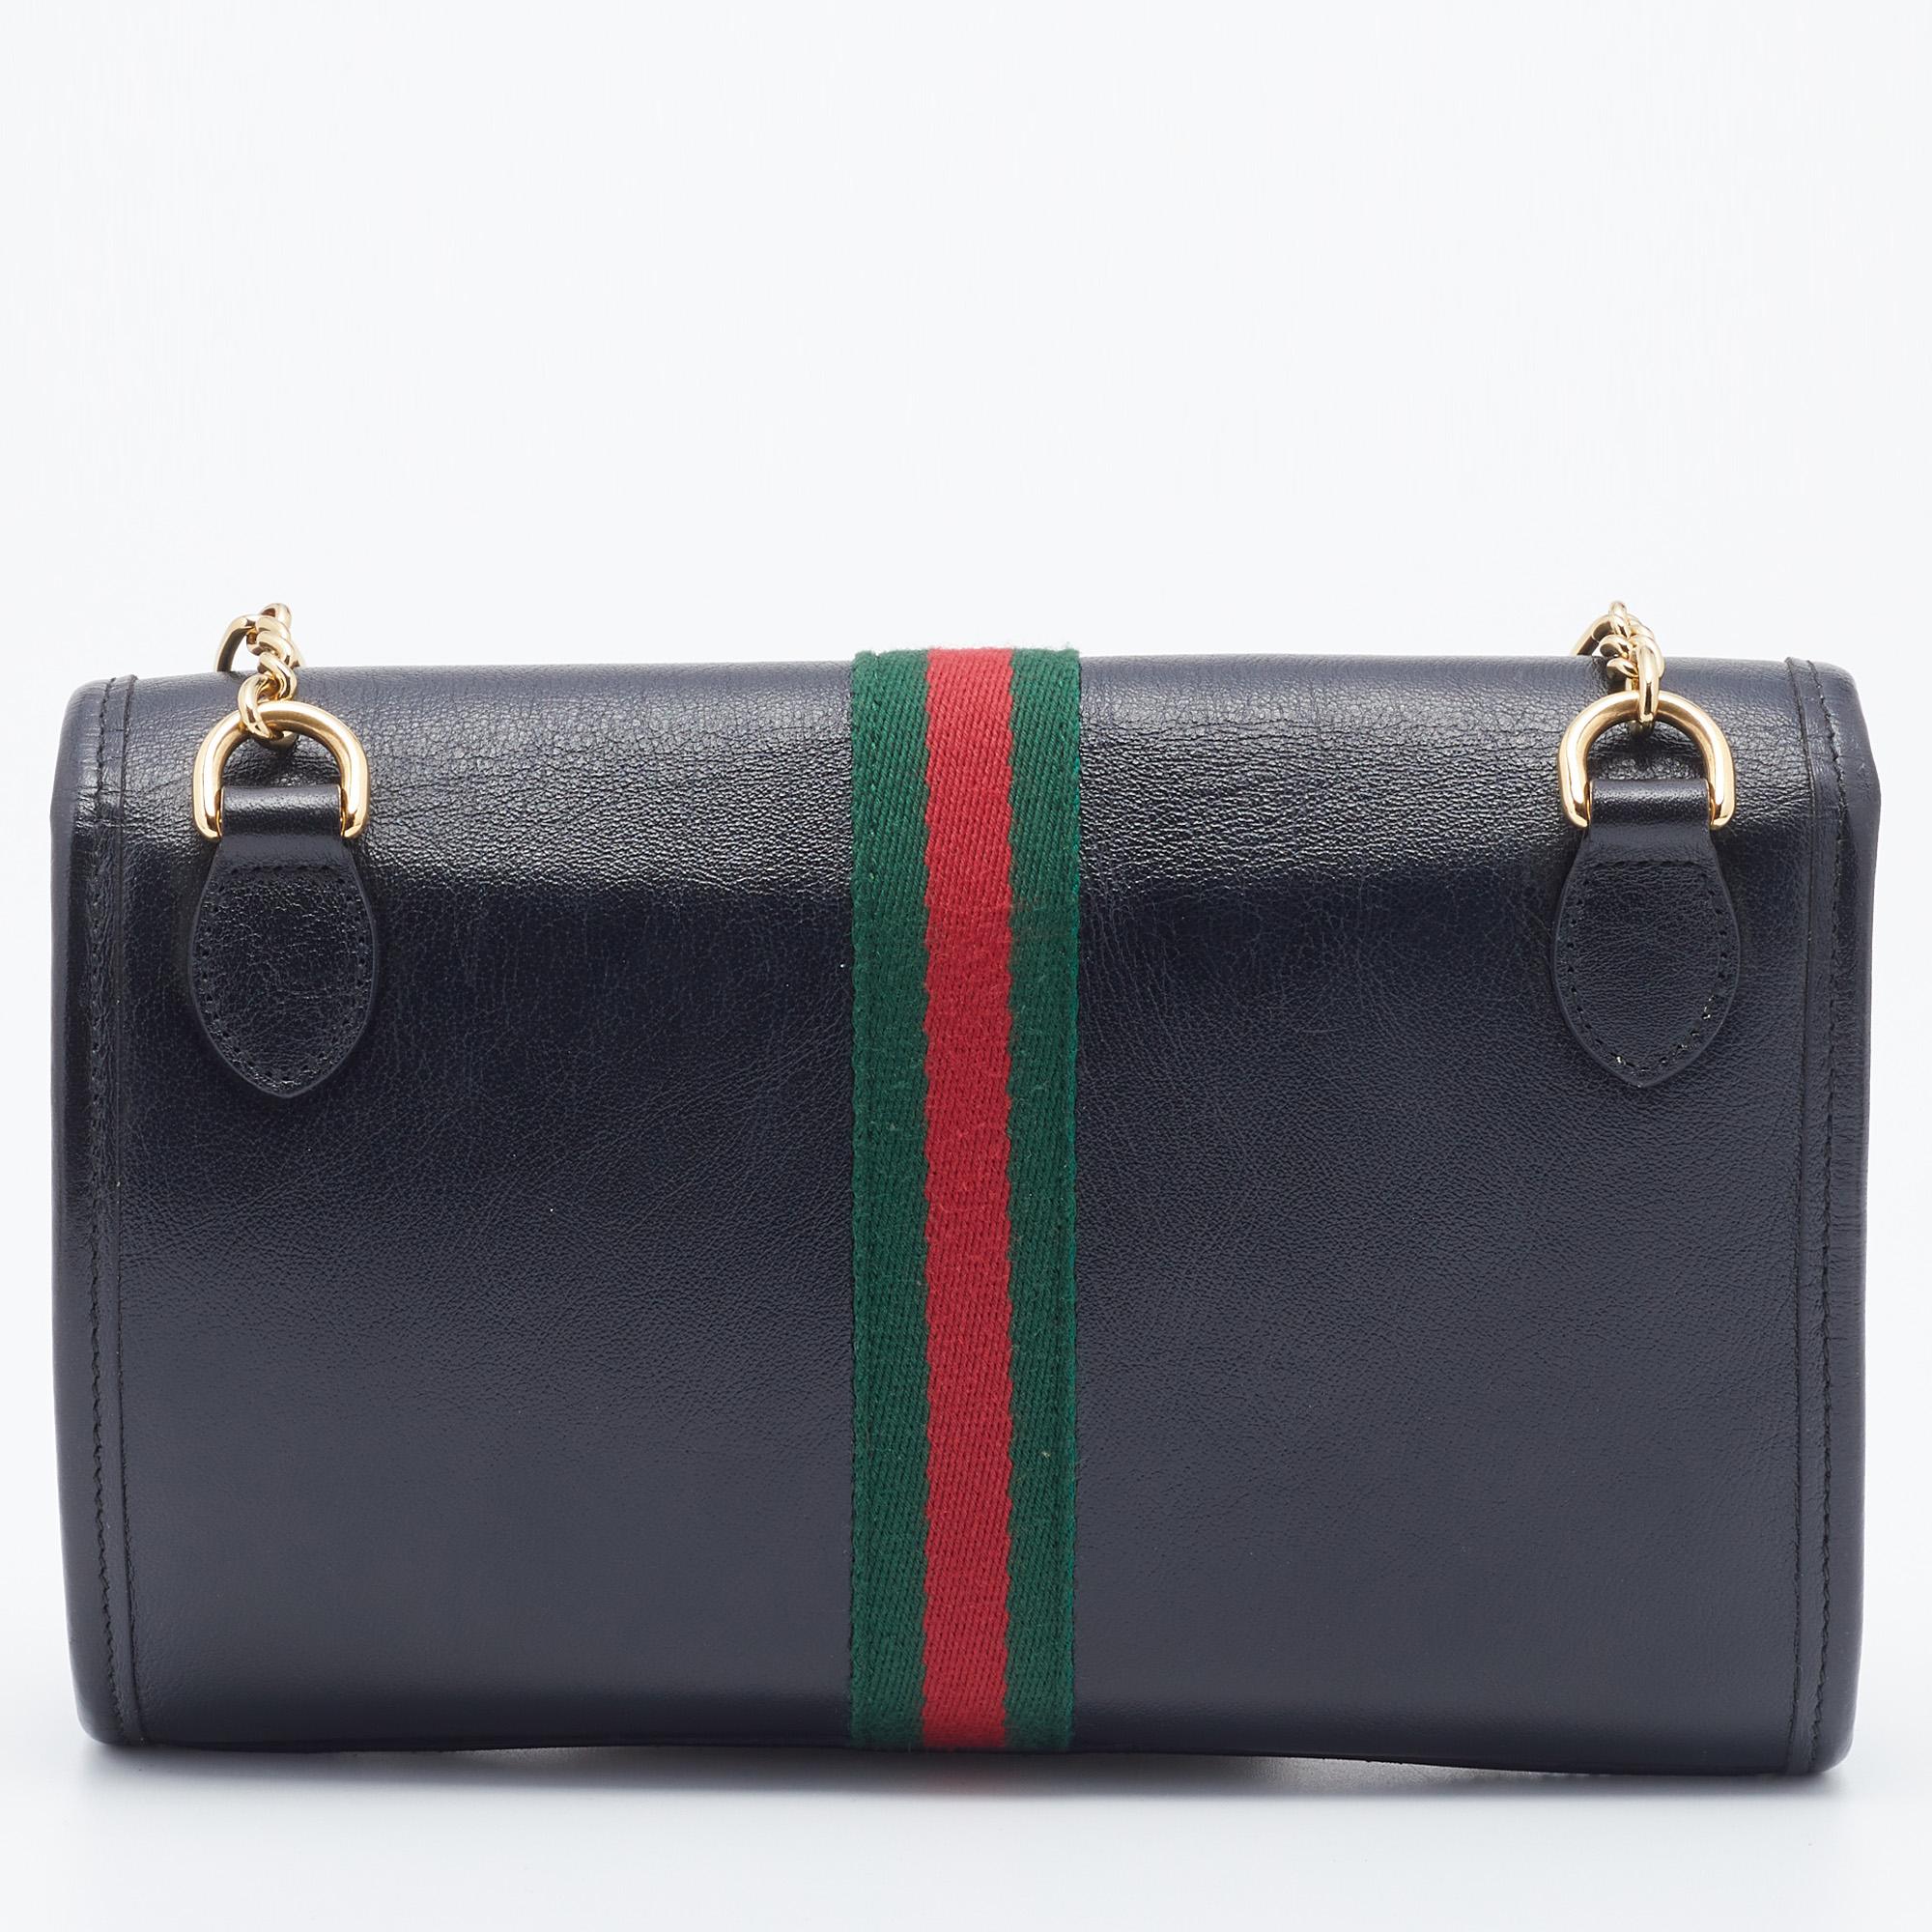 With a Gucci bag by your side, it's going to be a stylish OOTD no matter the day. Here, we have this Gucci Rajah shoulder bag just for you. Its compact shape, notable details, and simple elegance make it a worthy purchase and a versatile